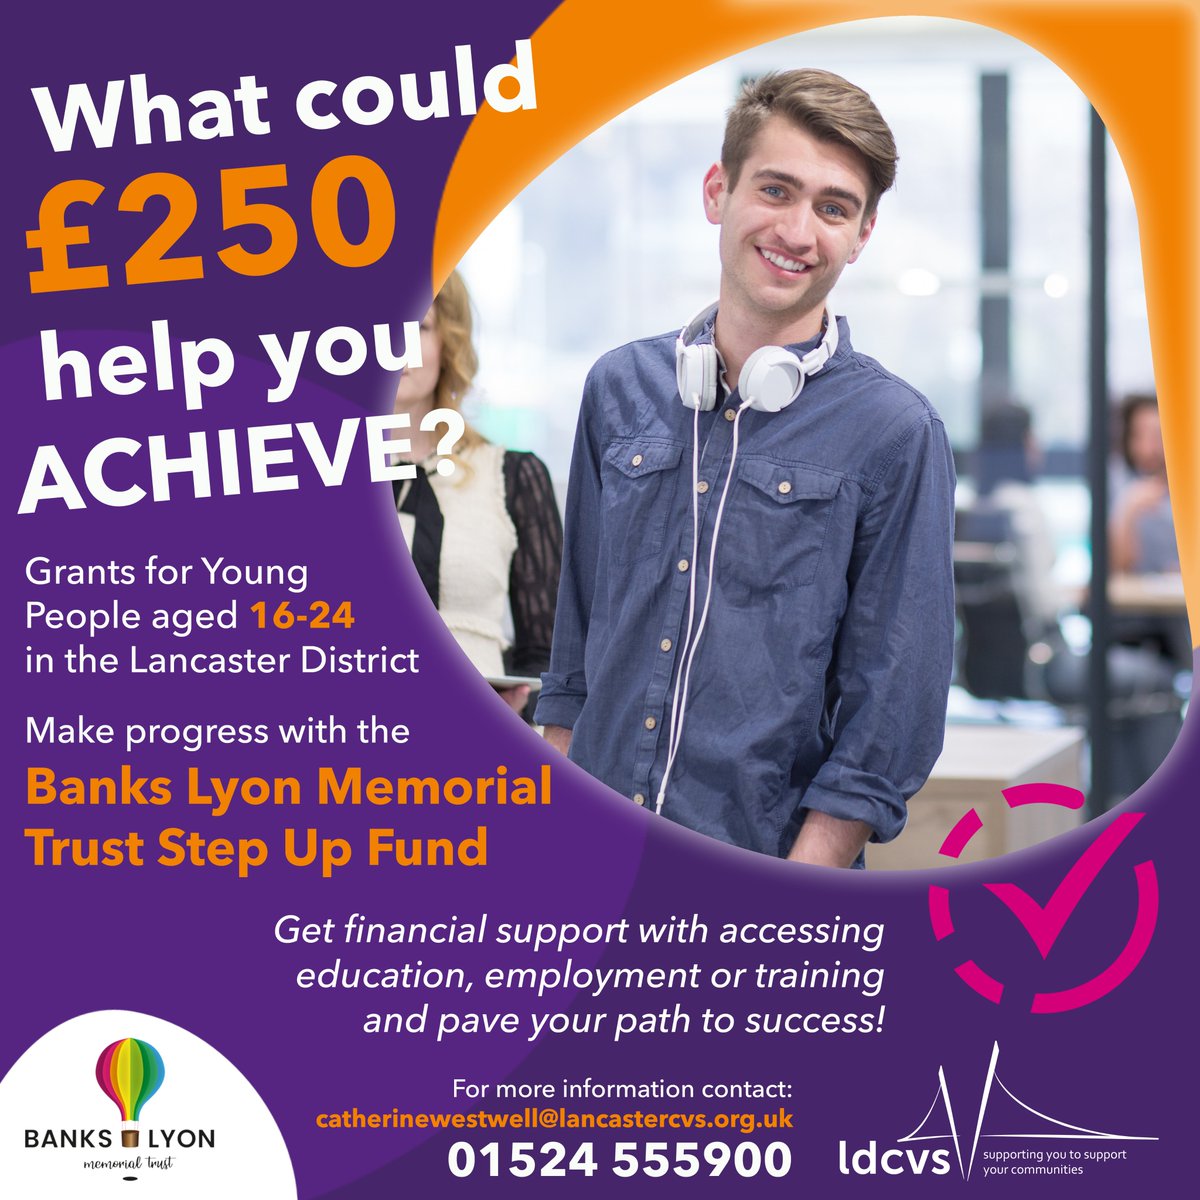 Aged 16-24 living in the #LancasterDistrict? Facing education, training, or employment challenges? Grants up to £250 from @BLMemorialTrust #StepUpFund available for courses, equipment, or essentials. Pave your path to success! 🌟🎓🚀Contact catherinewestwell@lancastercvs.org.uk